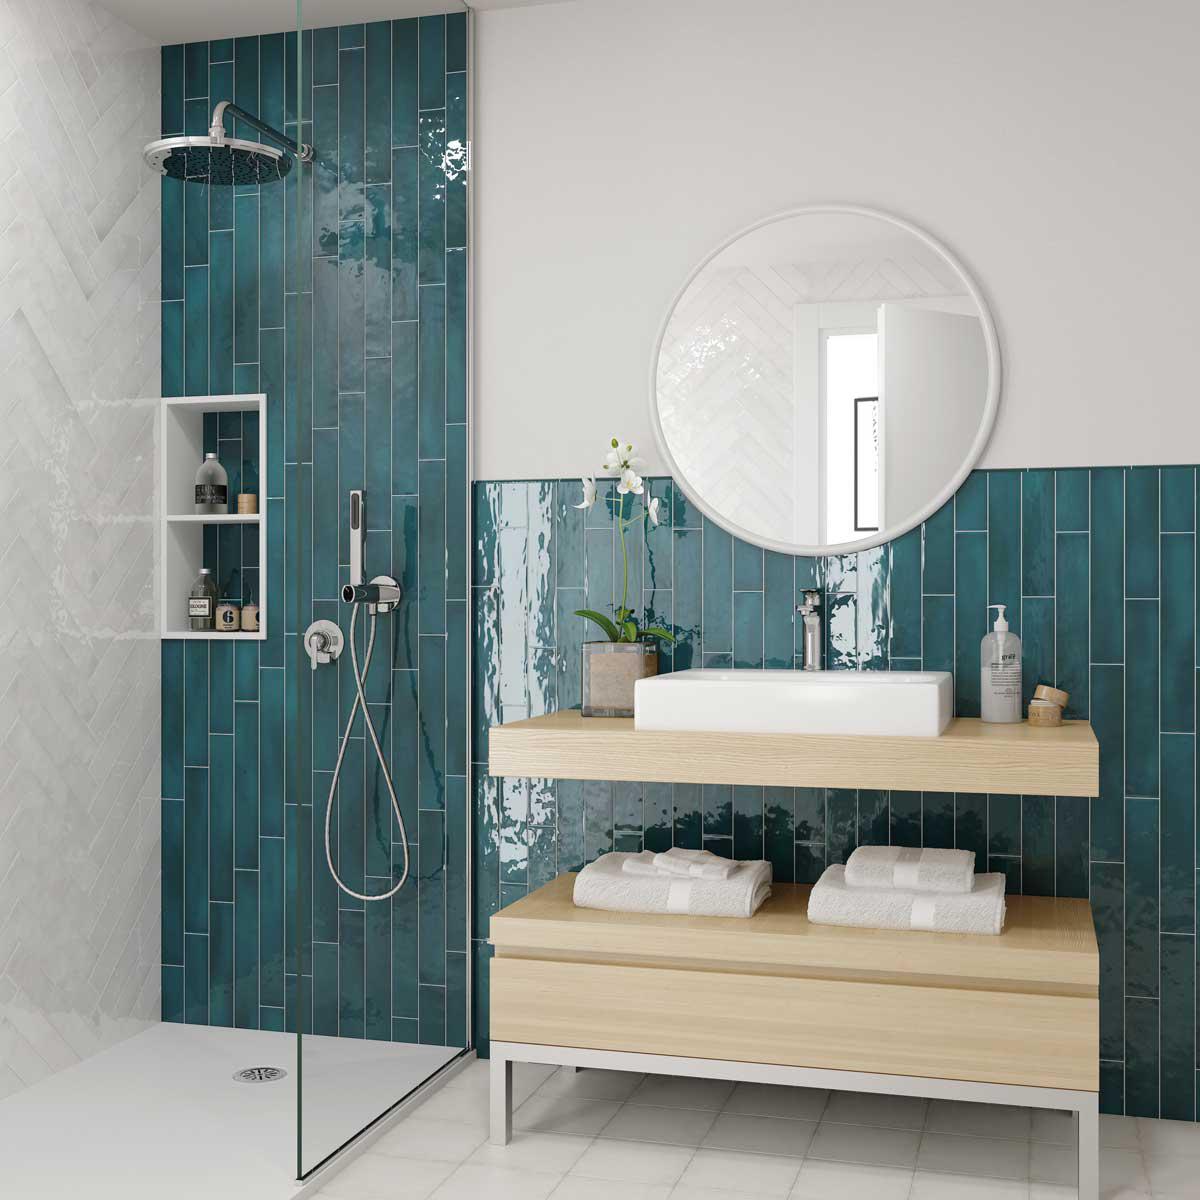 Contemporary bathroom ideas with colorful subway tiles and natural wood vanity